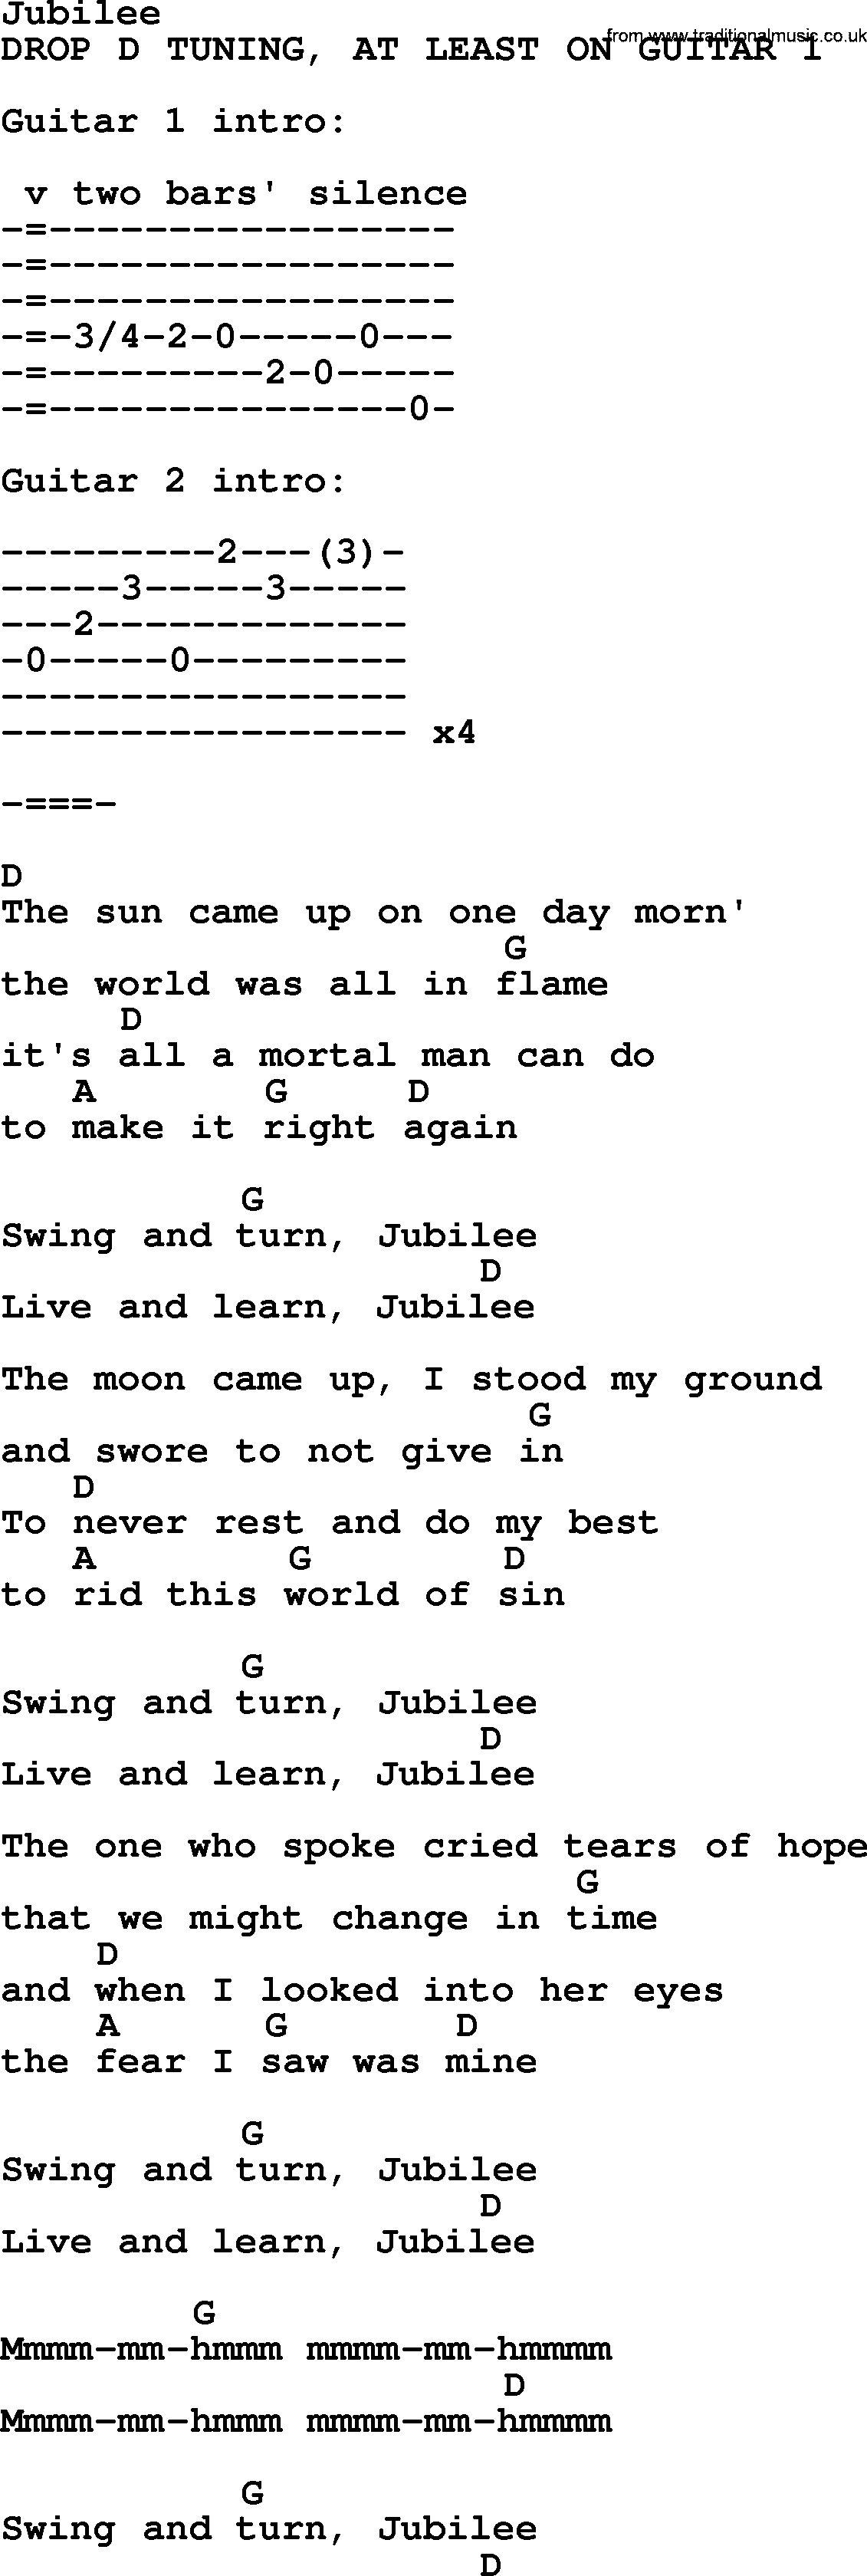 Bluegrass song: Jubilee, lyrics and chords